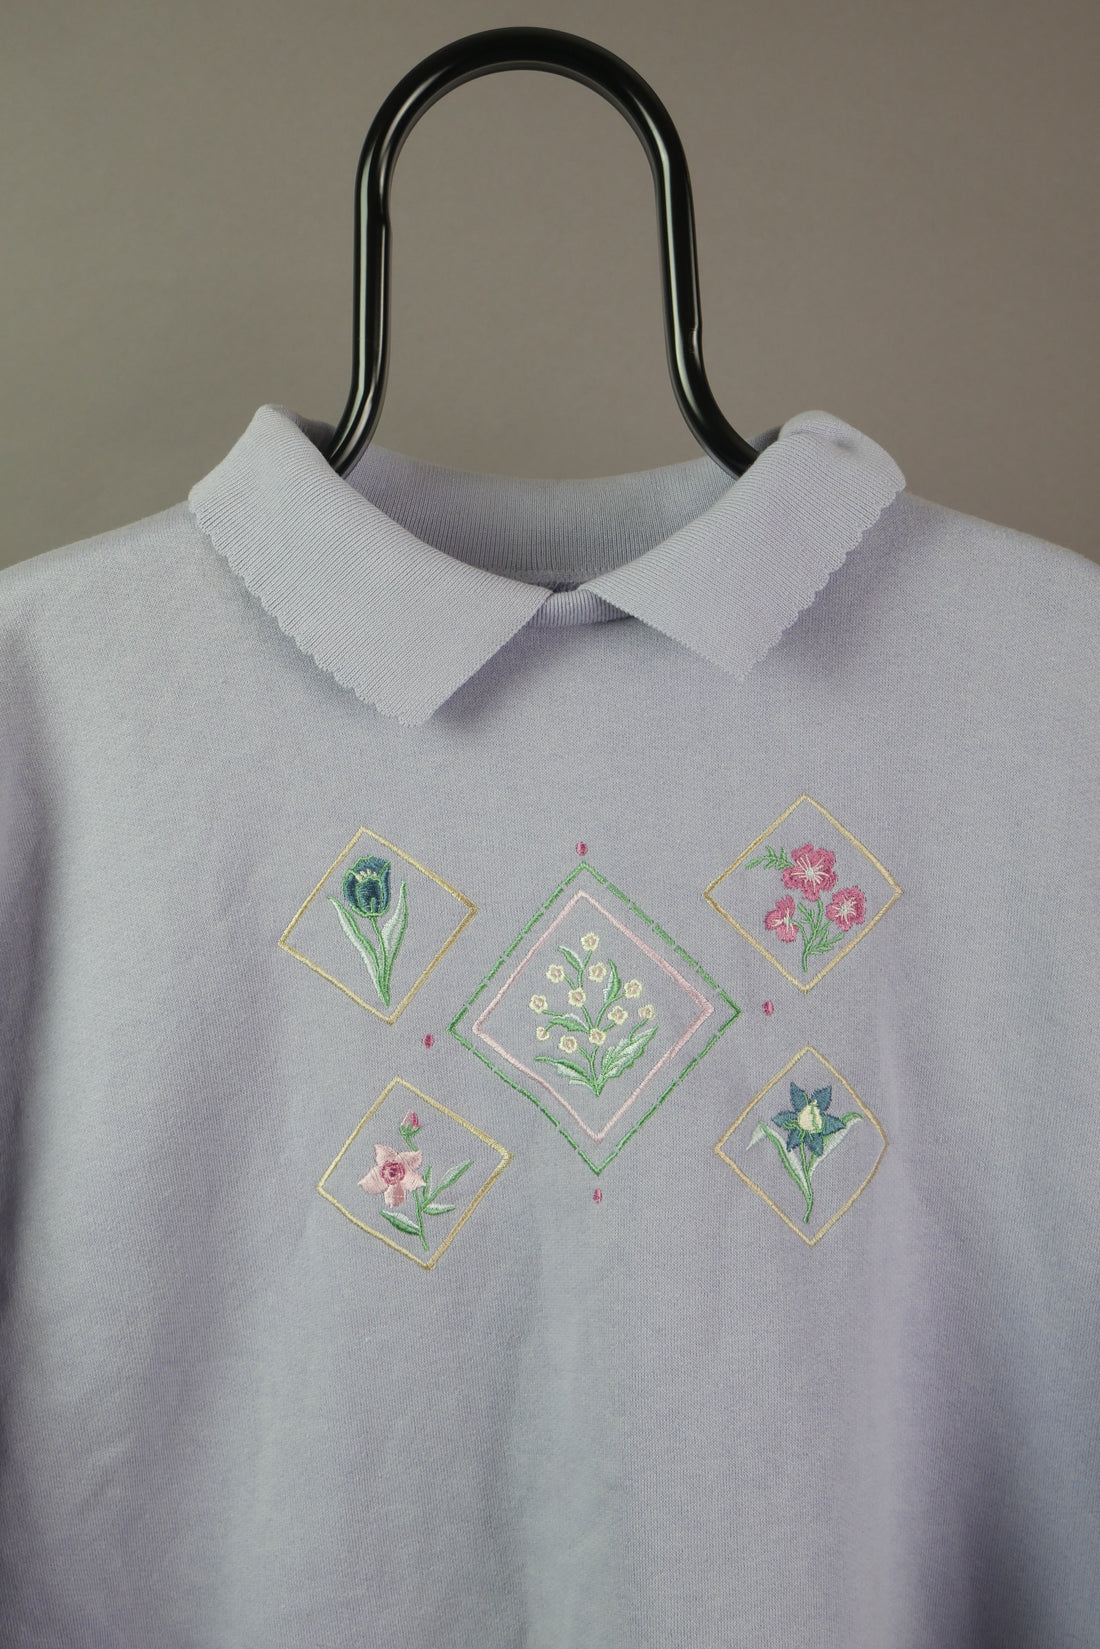 The Embroidered Flower Sweatshirt (L)